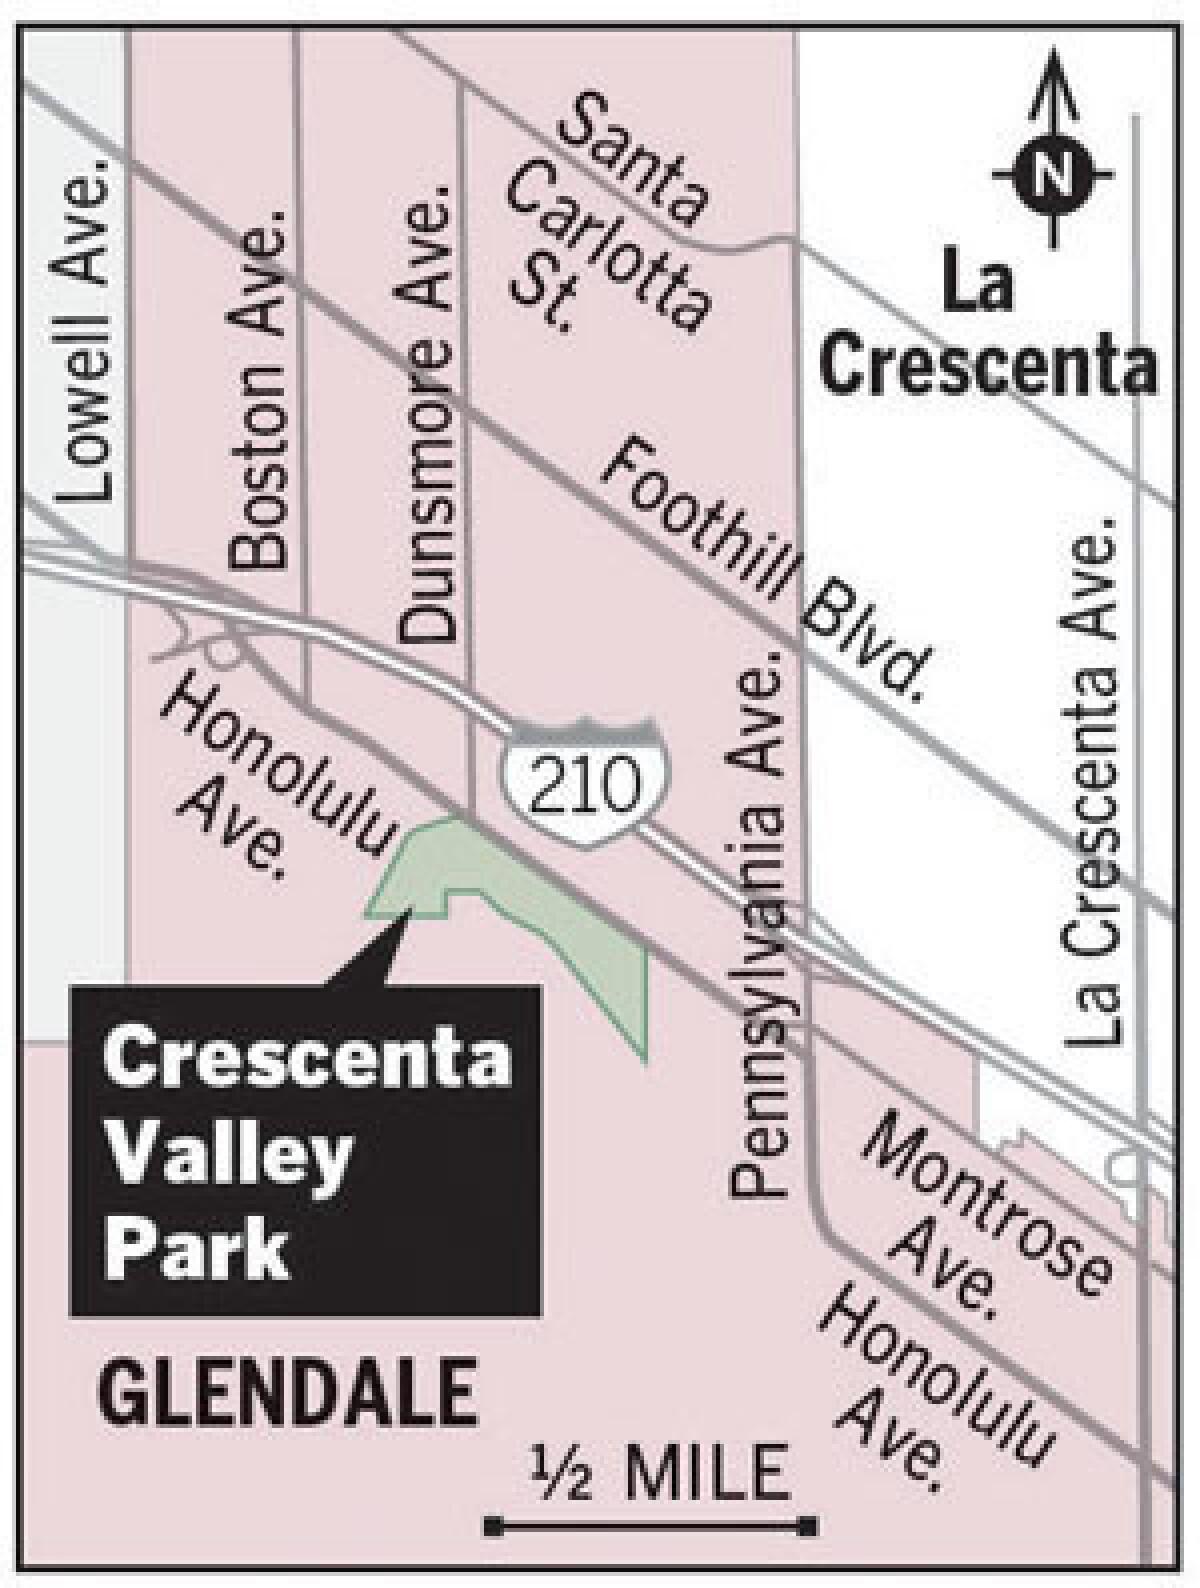 The Los Angeles County Board of Supervisors this year earmarked $800,000 for a 10,000 square-foot skating facility in Crescenta Valley Park.